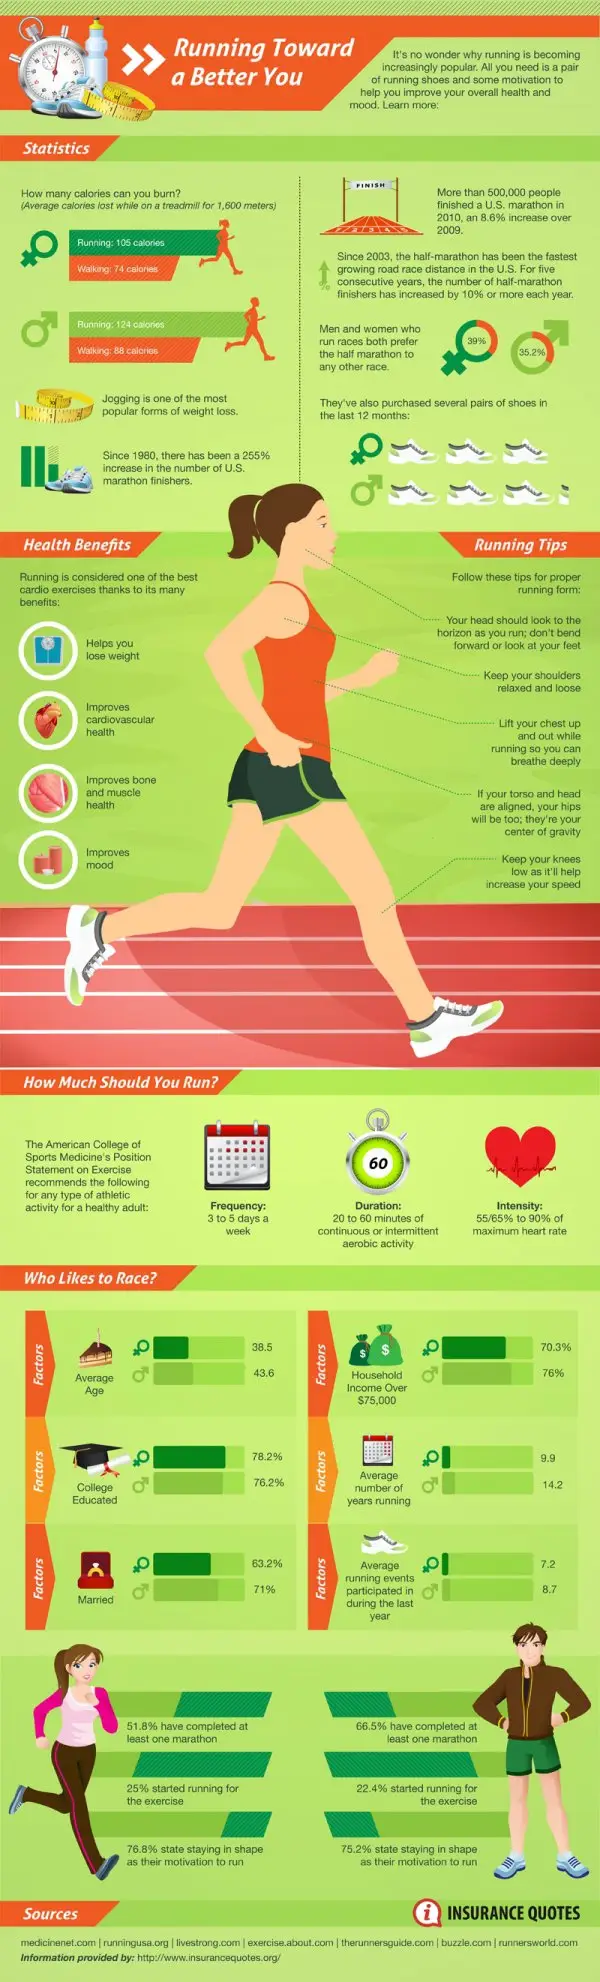 Why Running is a Great Exercise